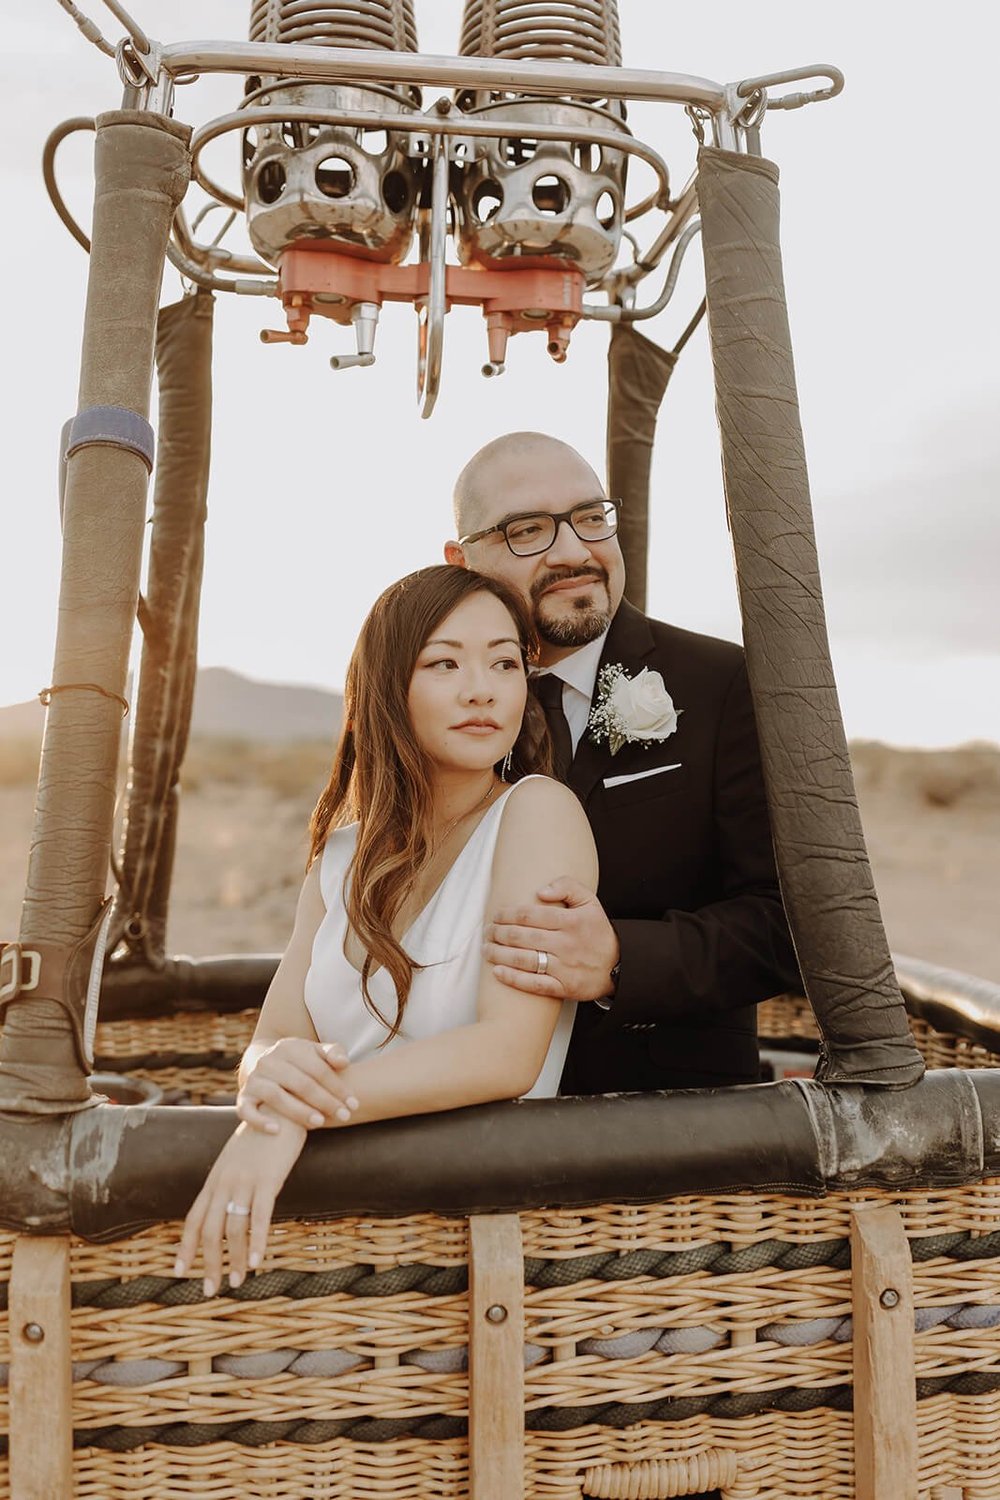 Bride and groom couple portraits inside a hot air balloon basket